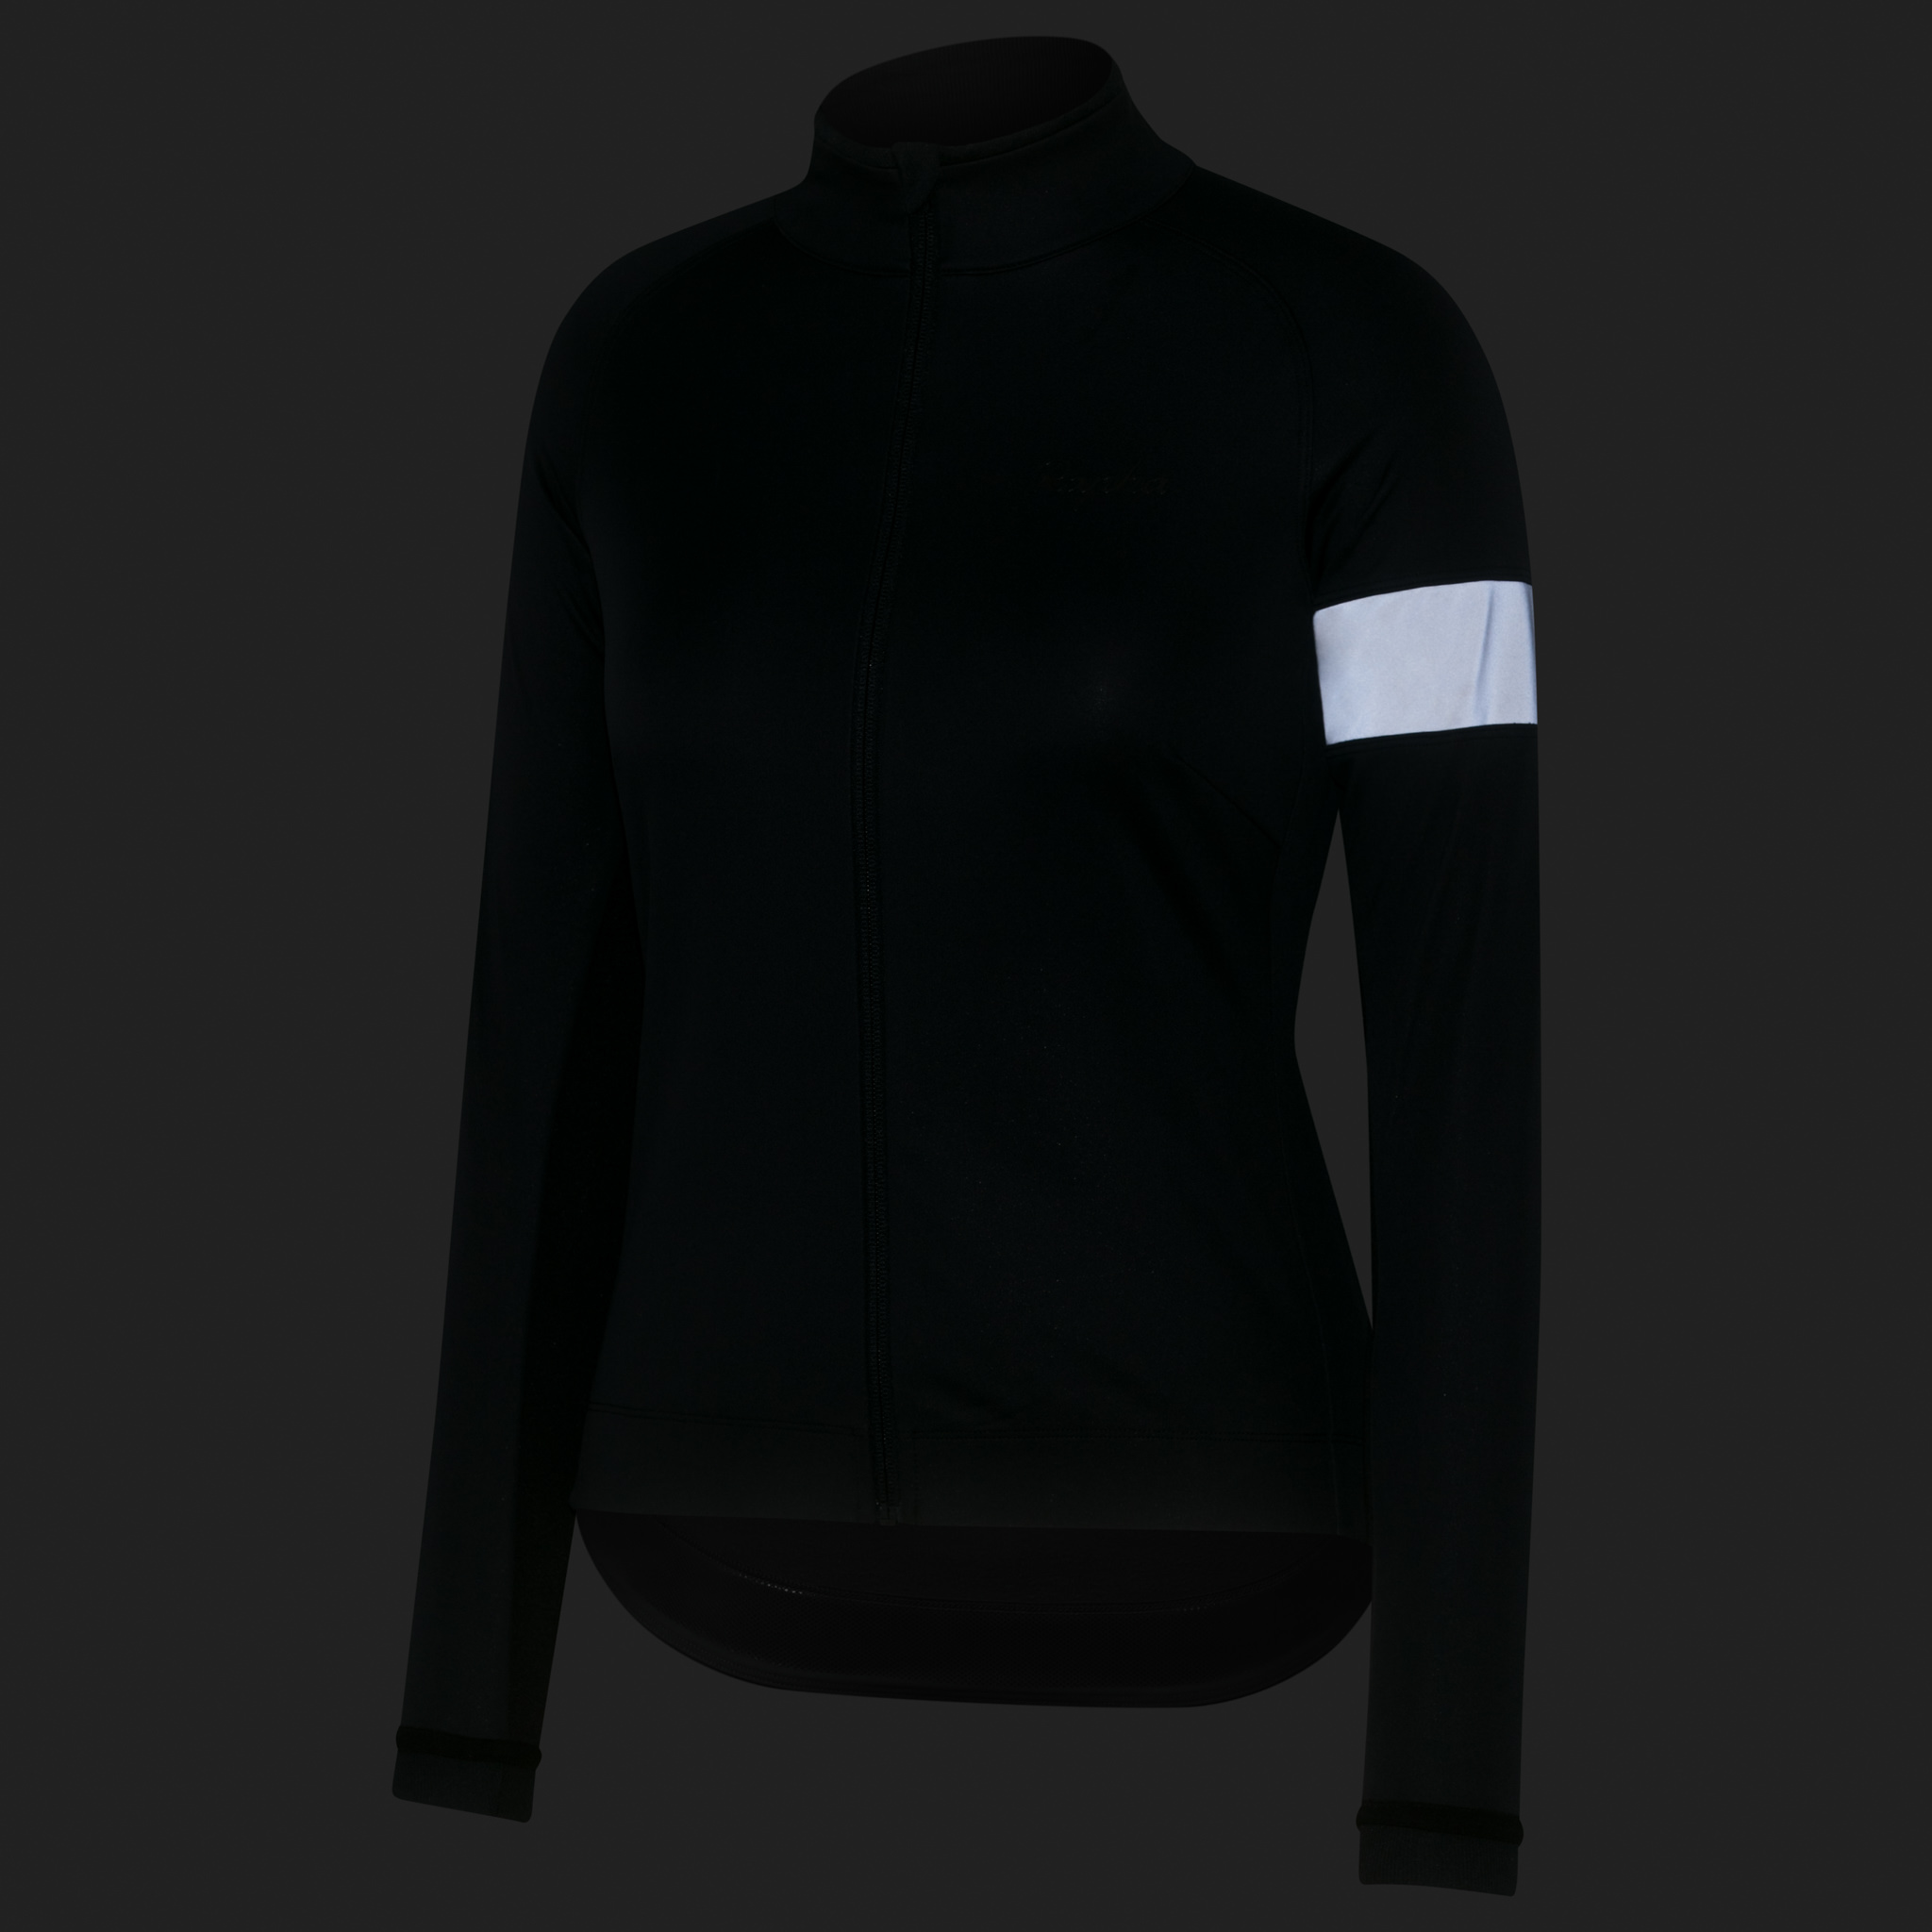 Women's Core Winter Cycling Jacket for Winter Riding | Rapha